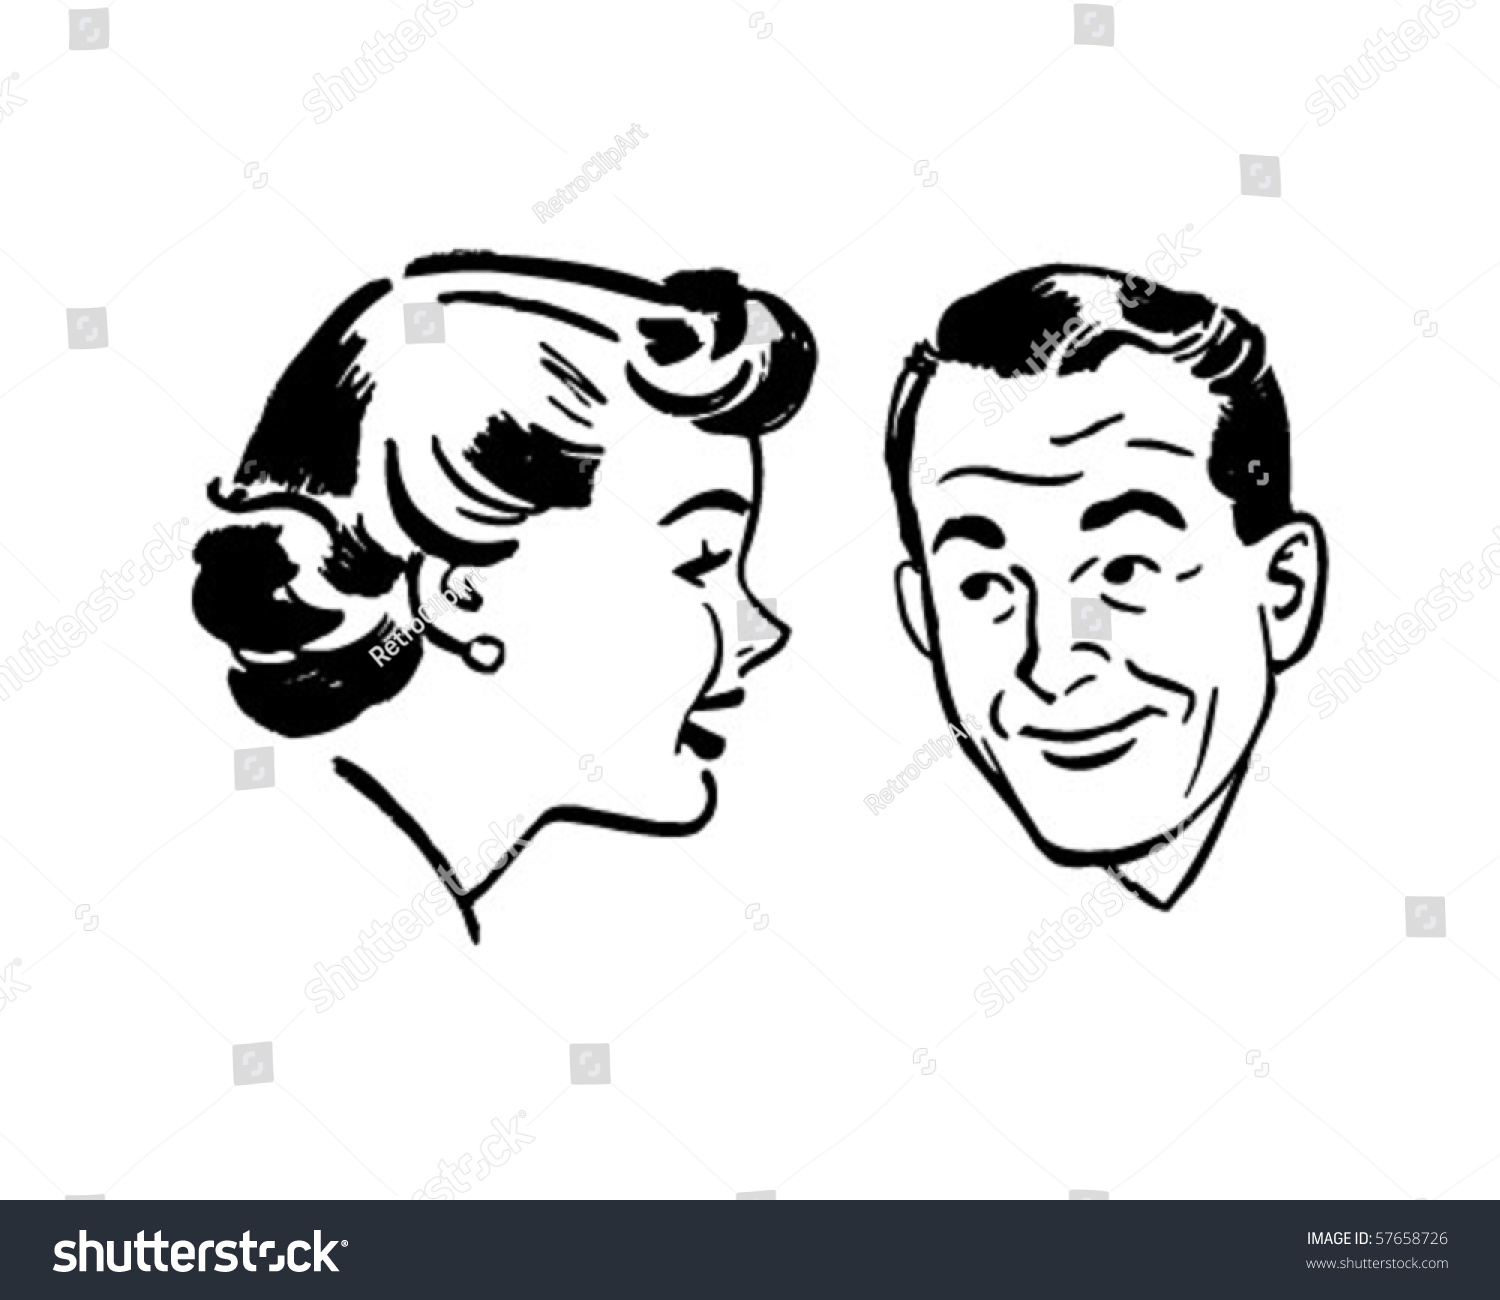 SVG of Man And Woman Chatting - Retro Clip Art svg